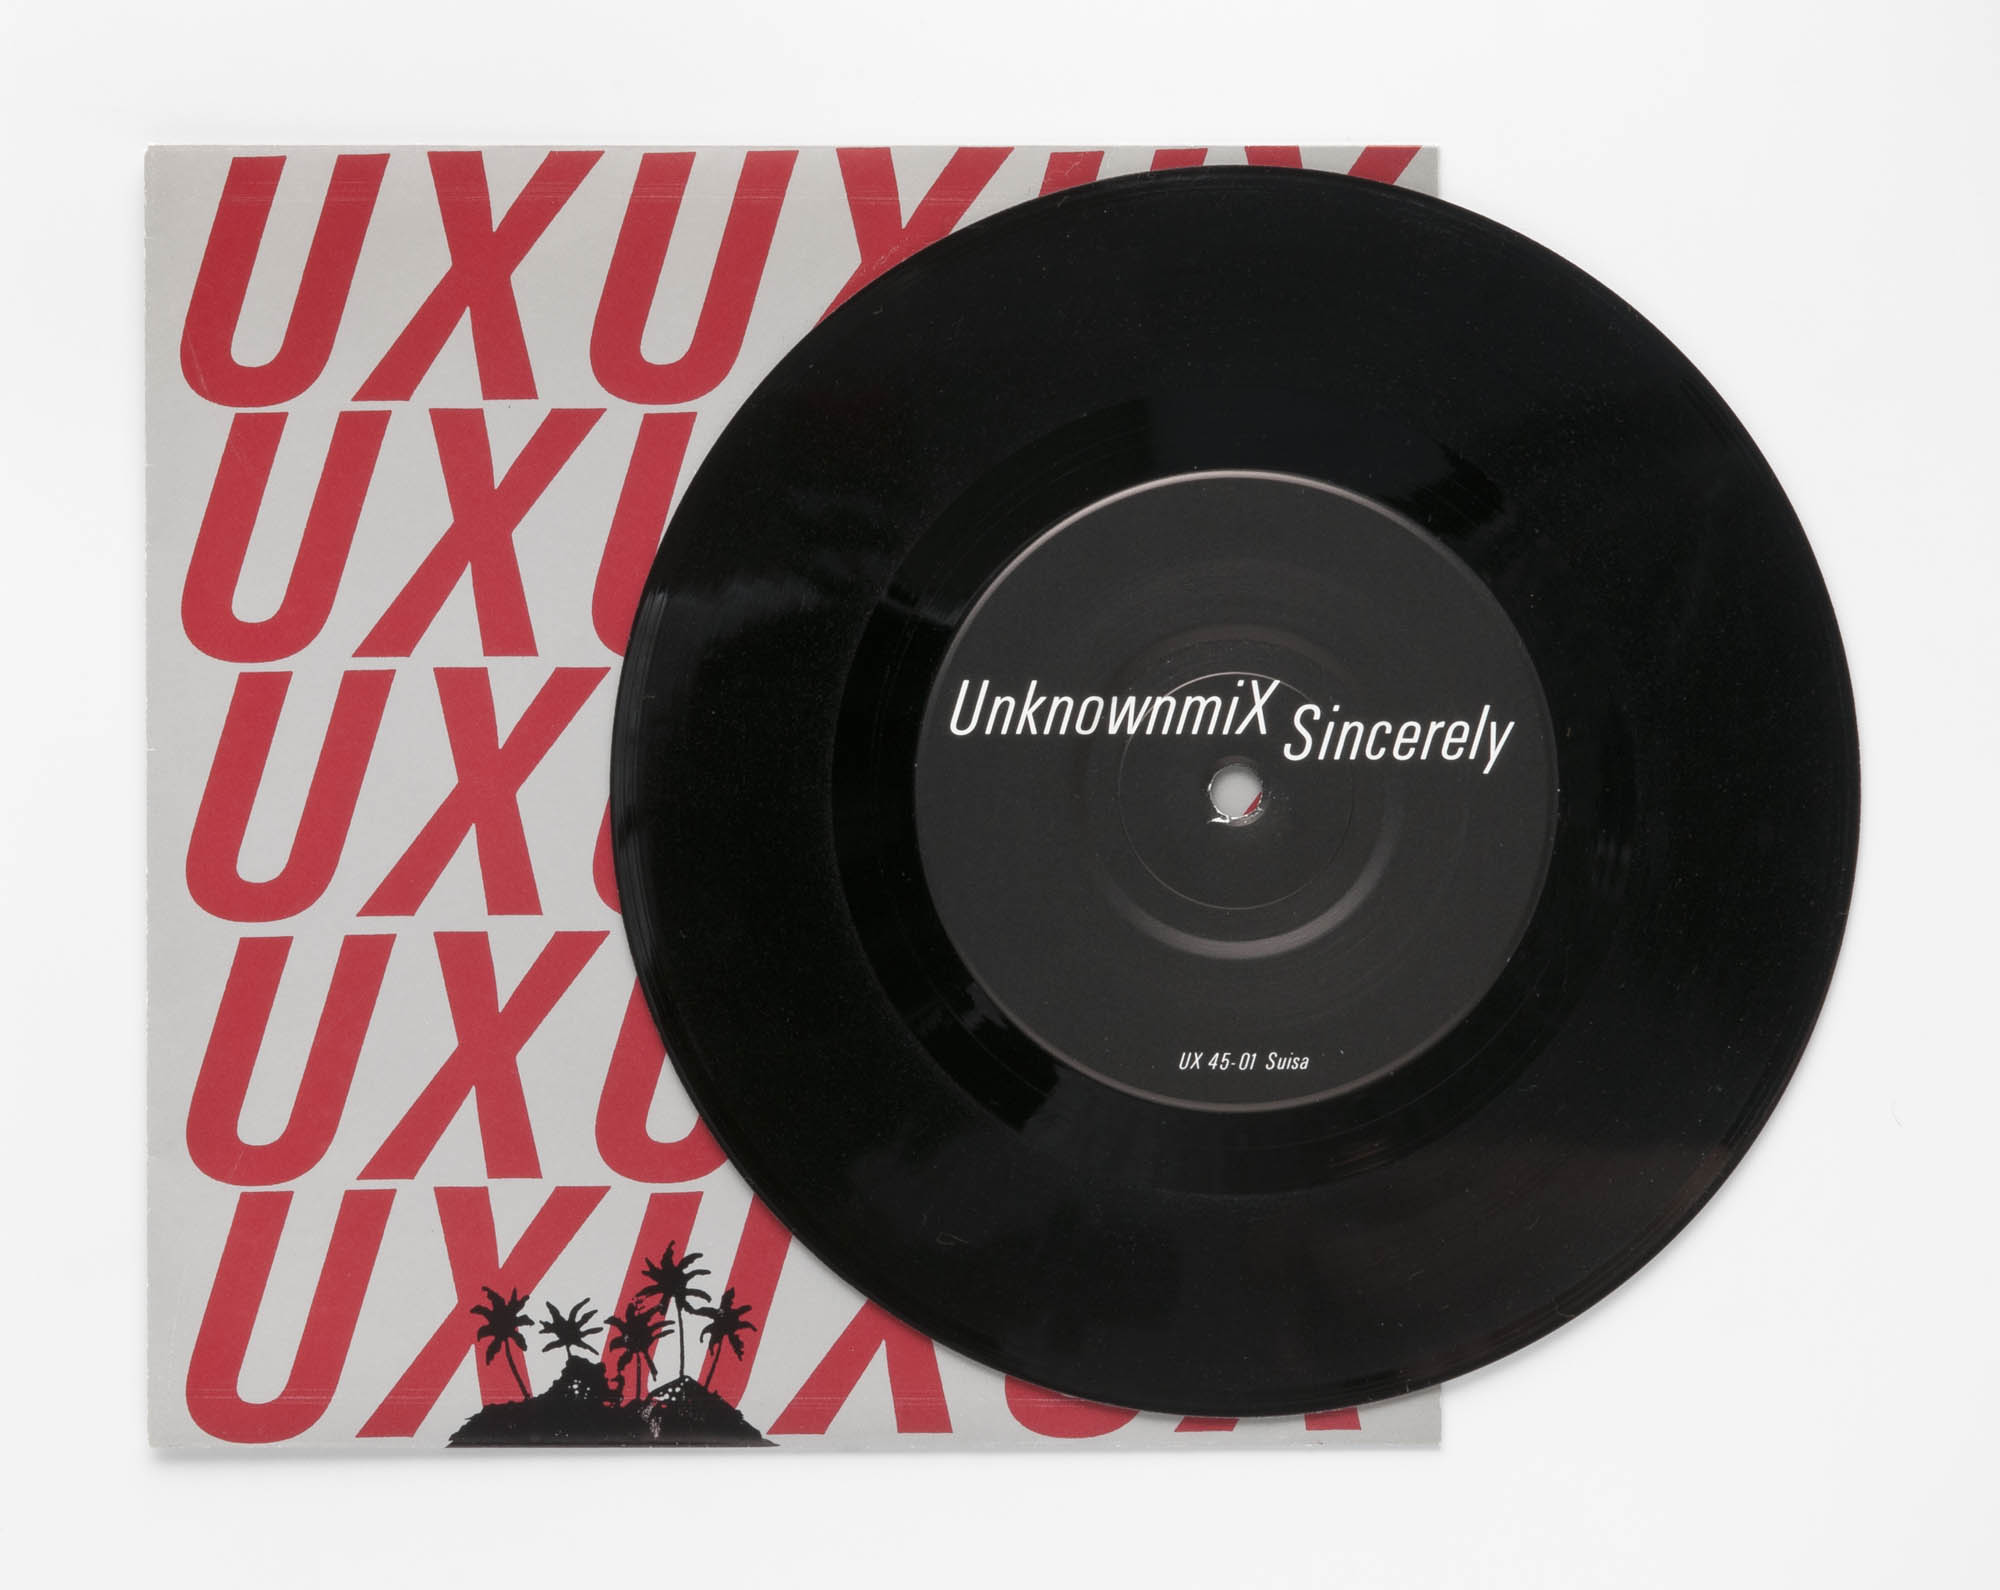 Unknownmix – UX Hans-Rudolf Lutz Record sleeve (front and back)